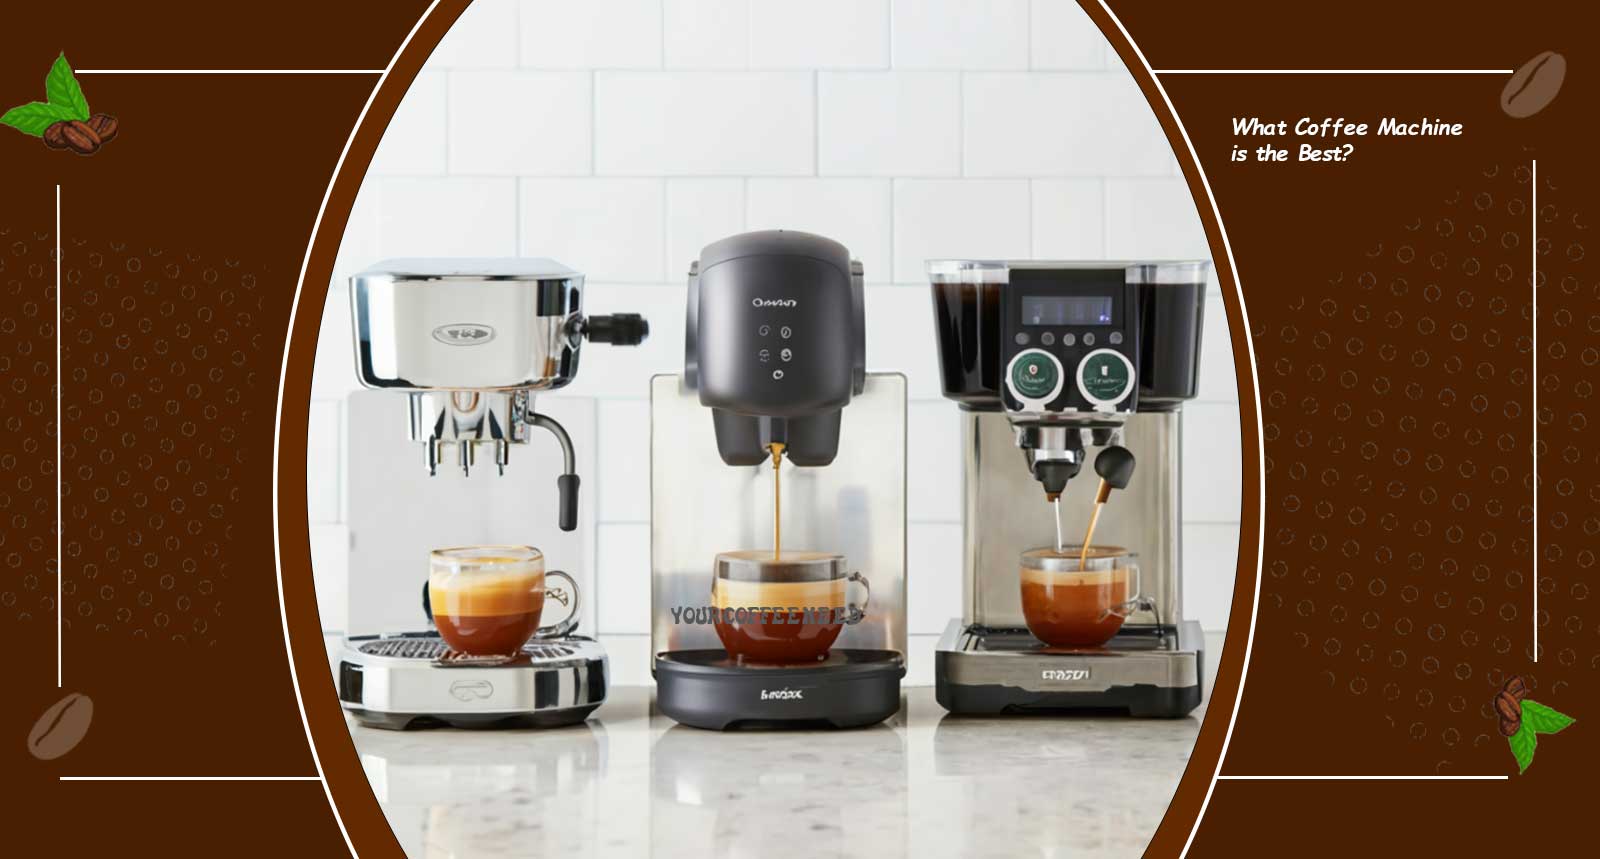 What Coffee Machine is the Best?